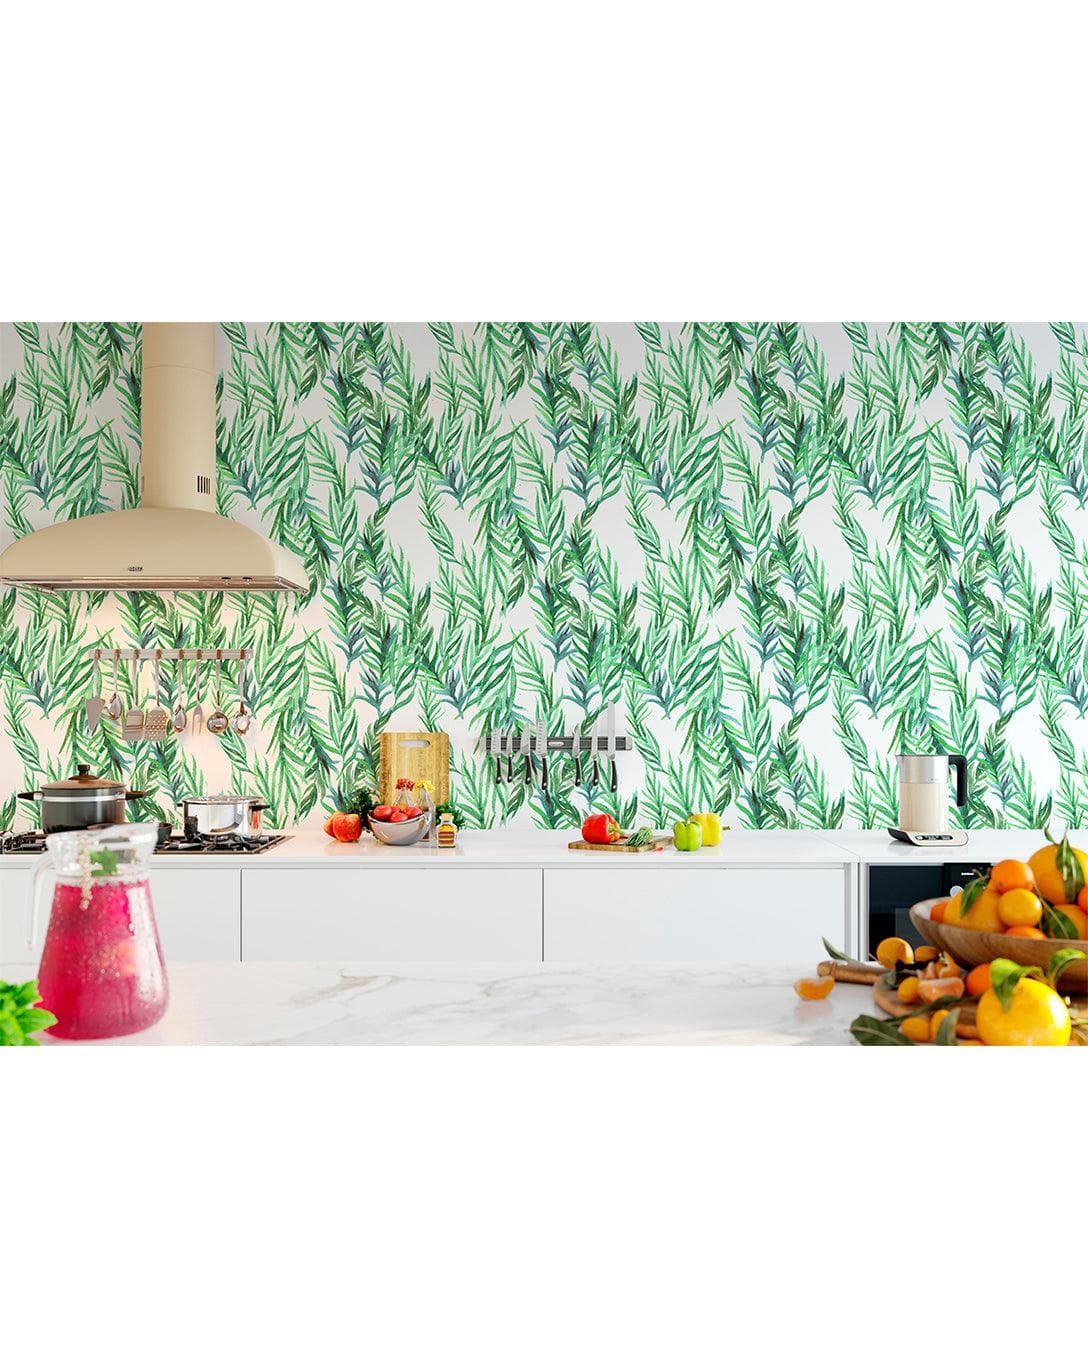 Exotic Palms Tropical Wall Mural Exotic Palms Tropical Wall Mural Botanical Green Leaves Removable Wallpaper 